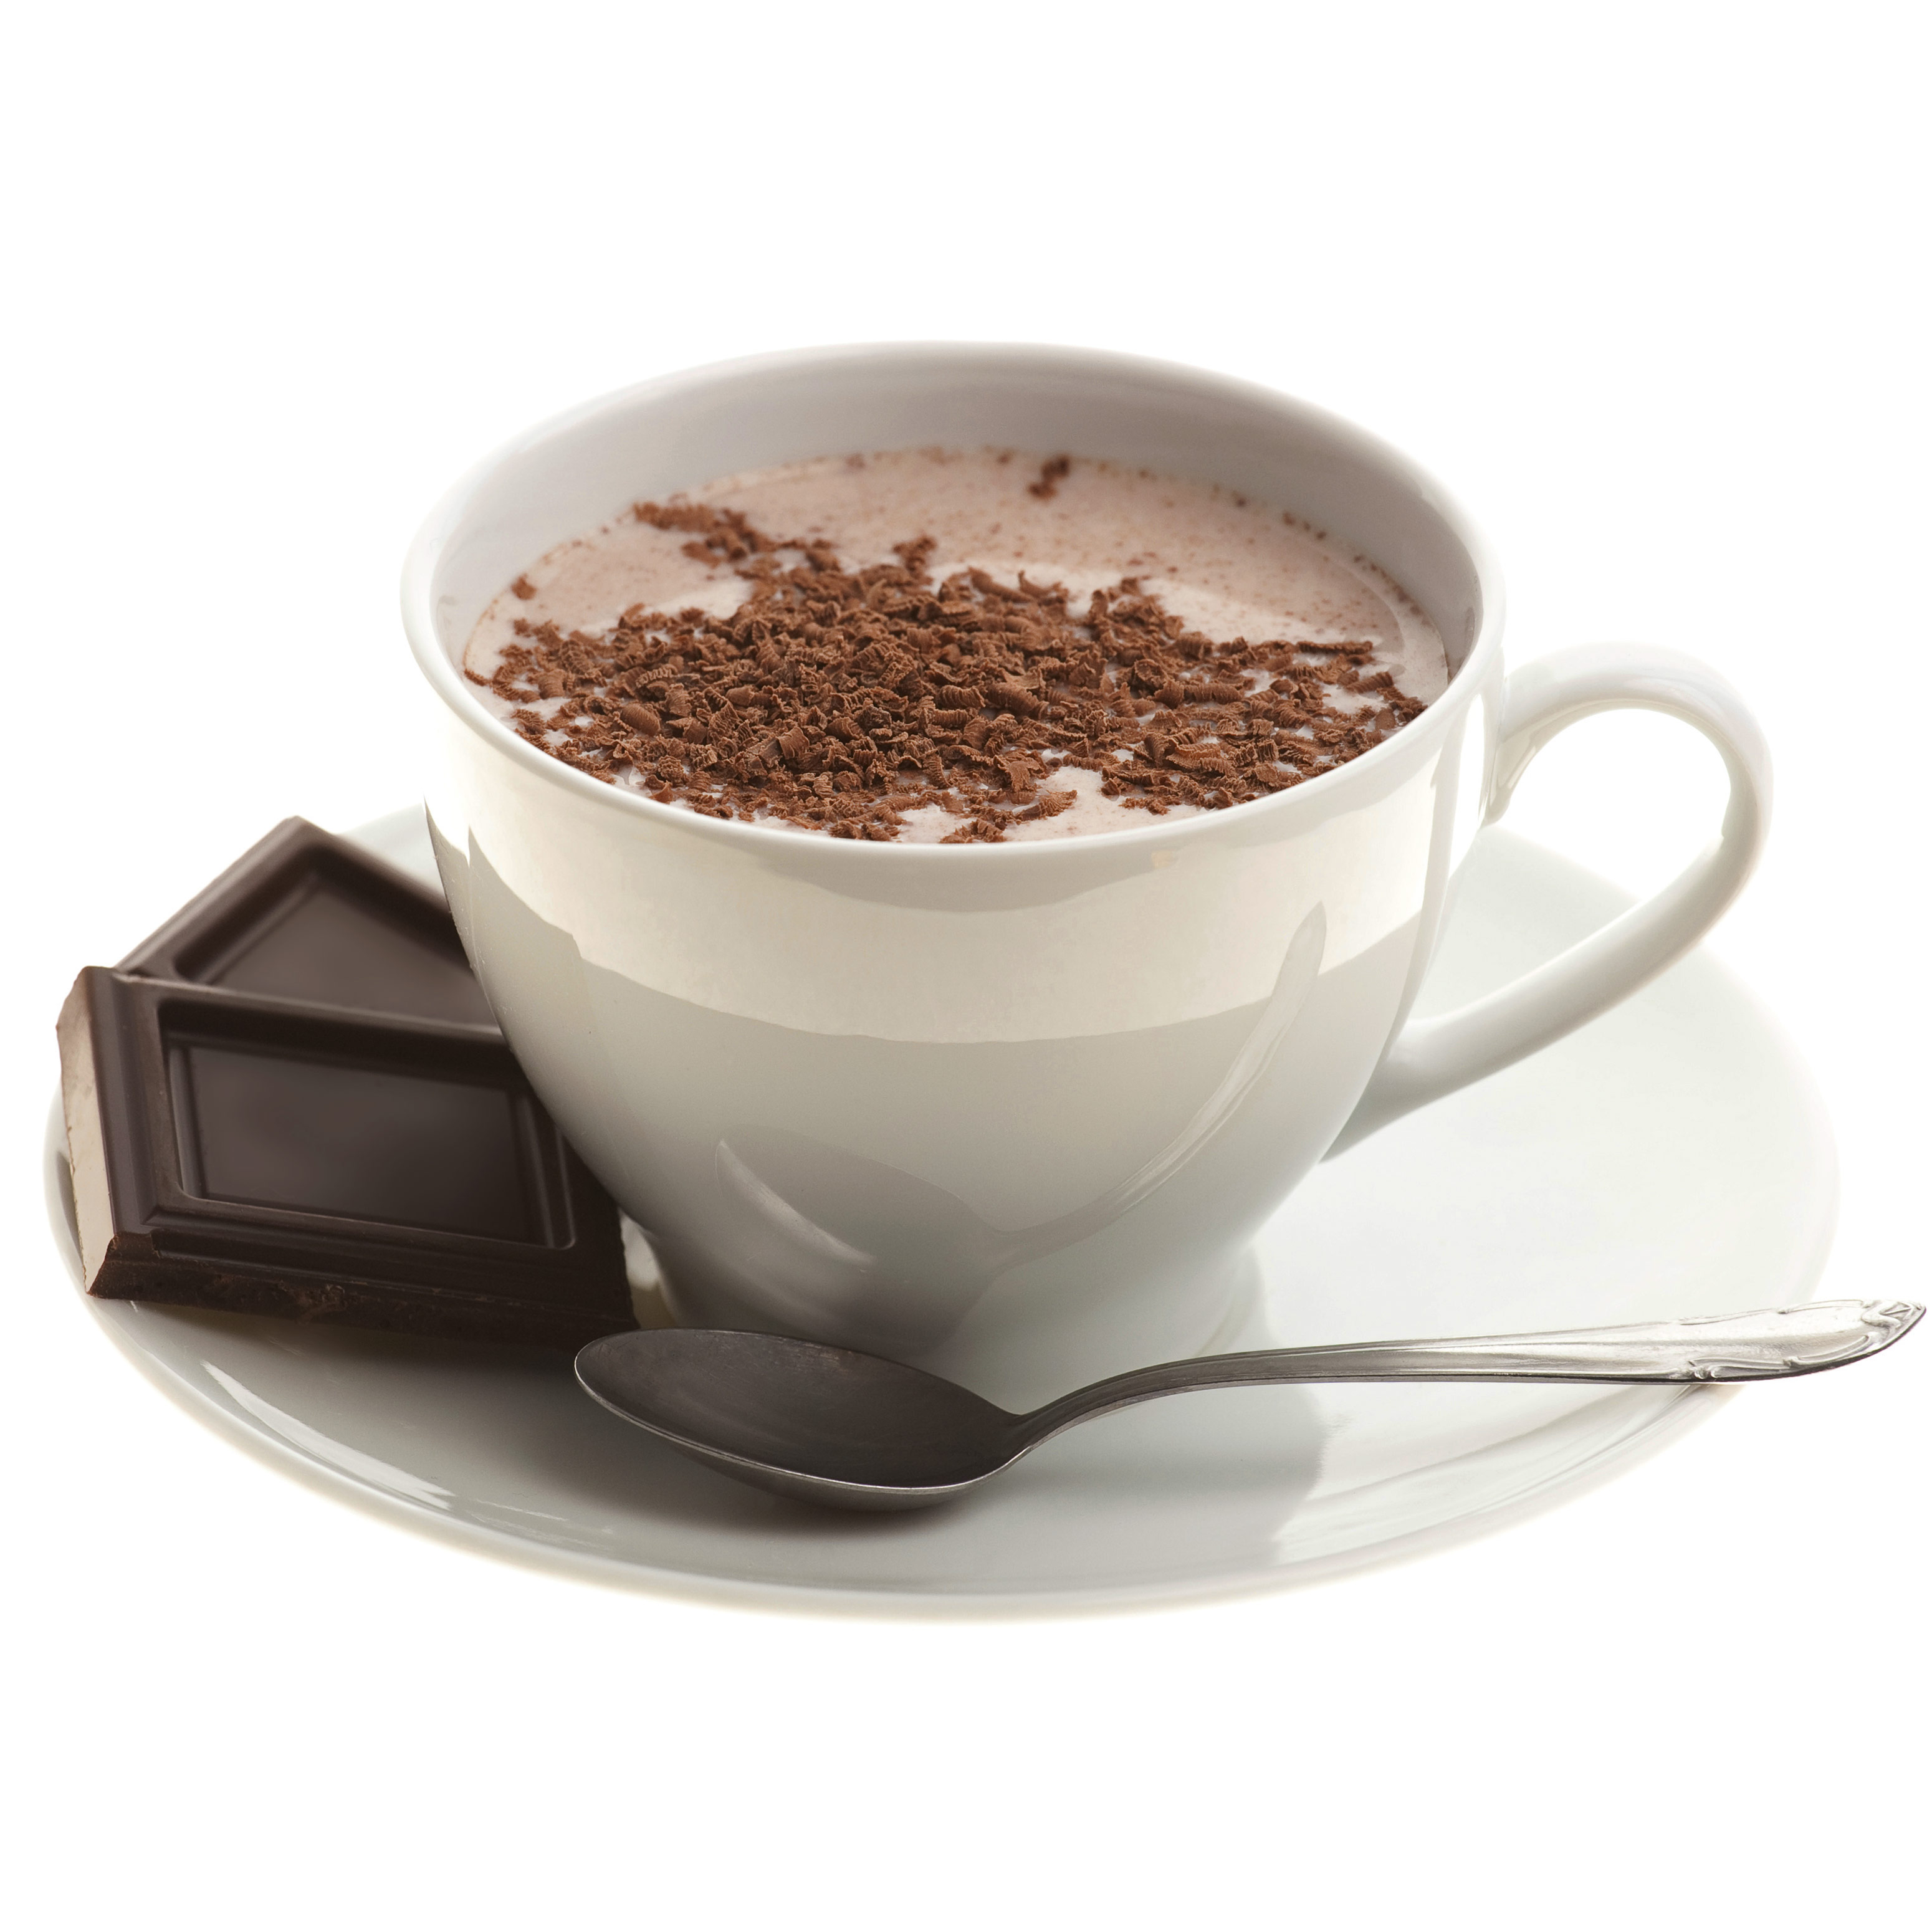 Hot chocolate cup photo